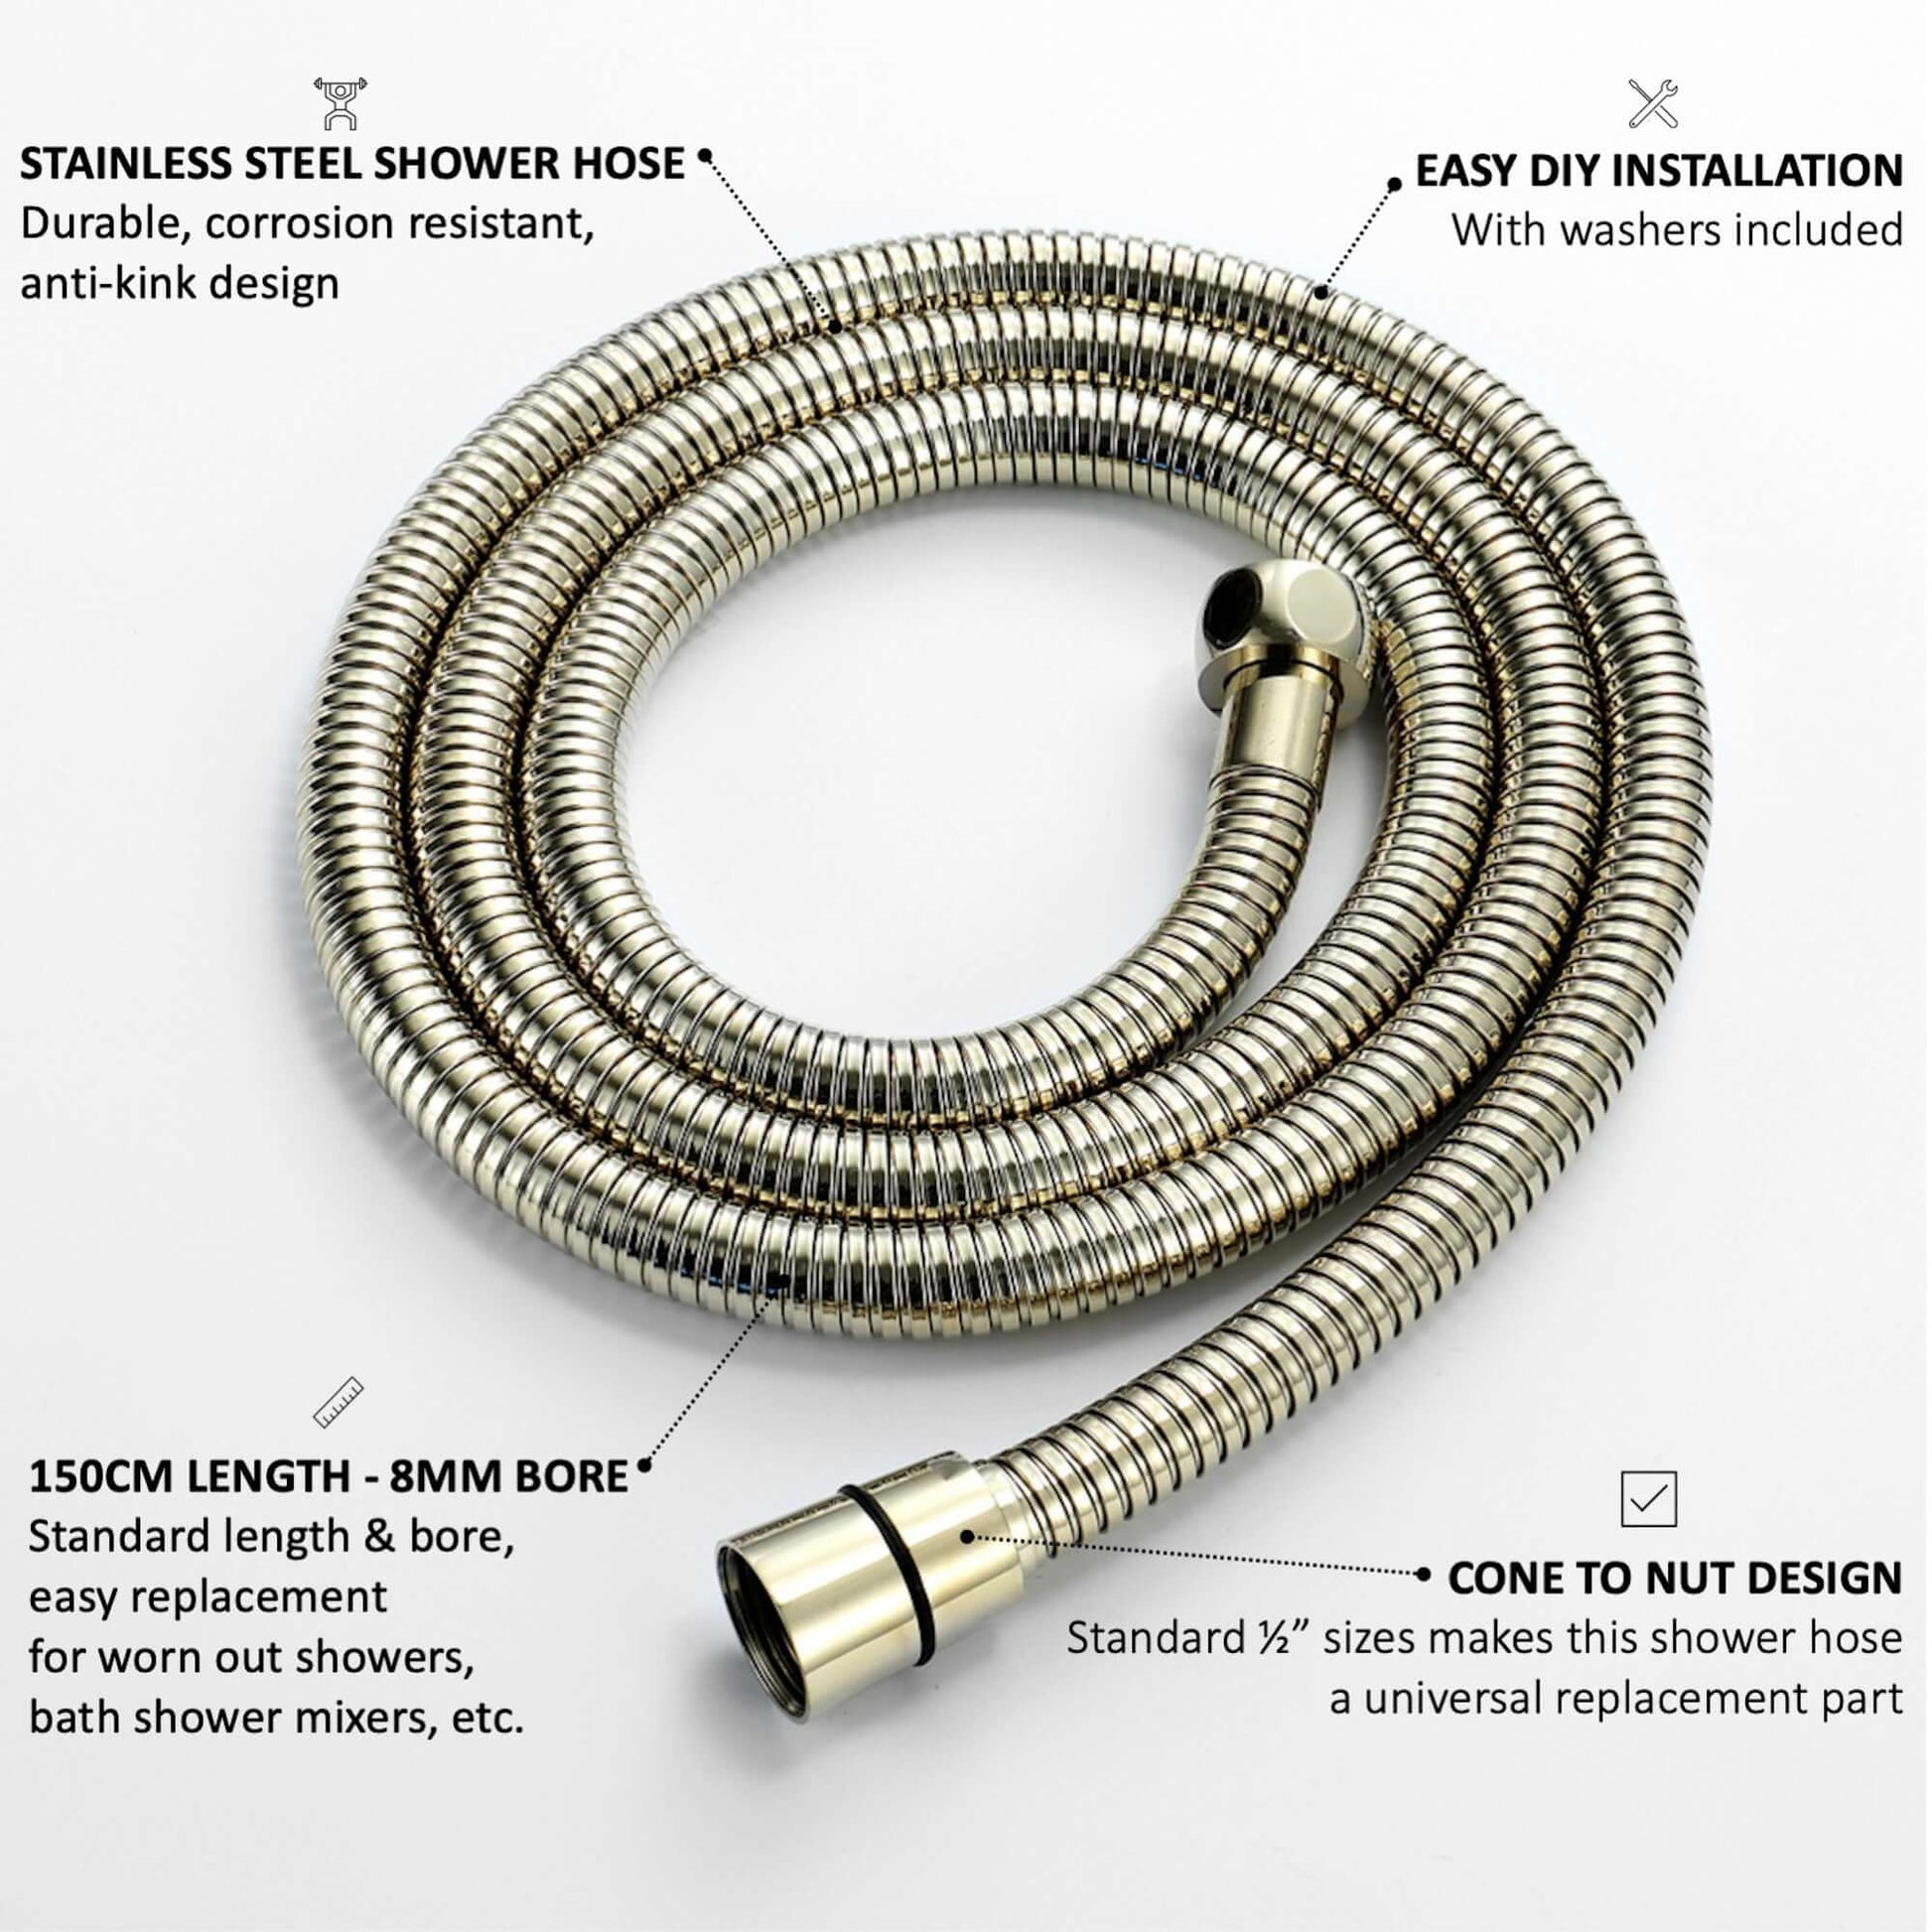 Flex shower hose stainless steel 1.5m standard bore - English gold - Showers